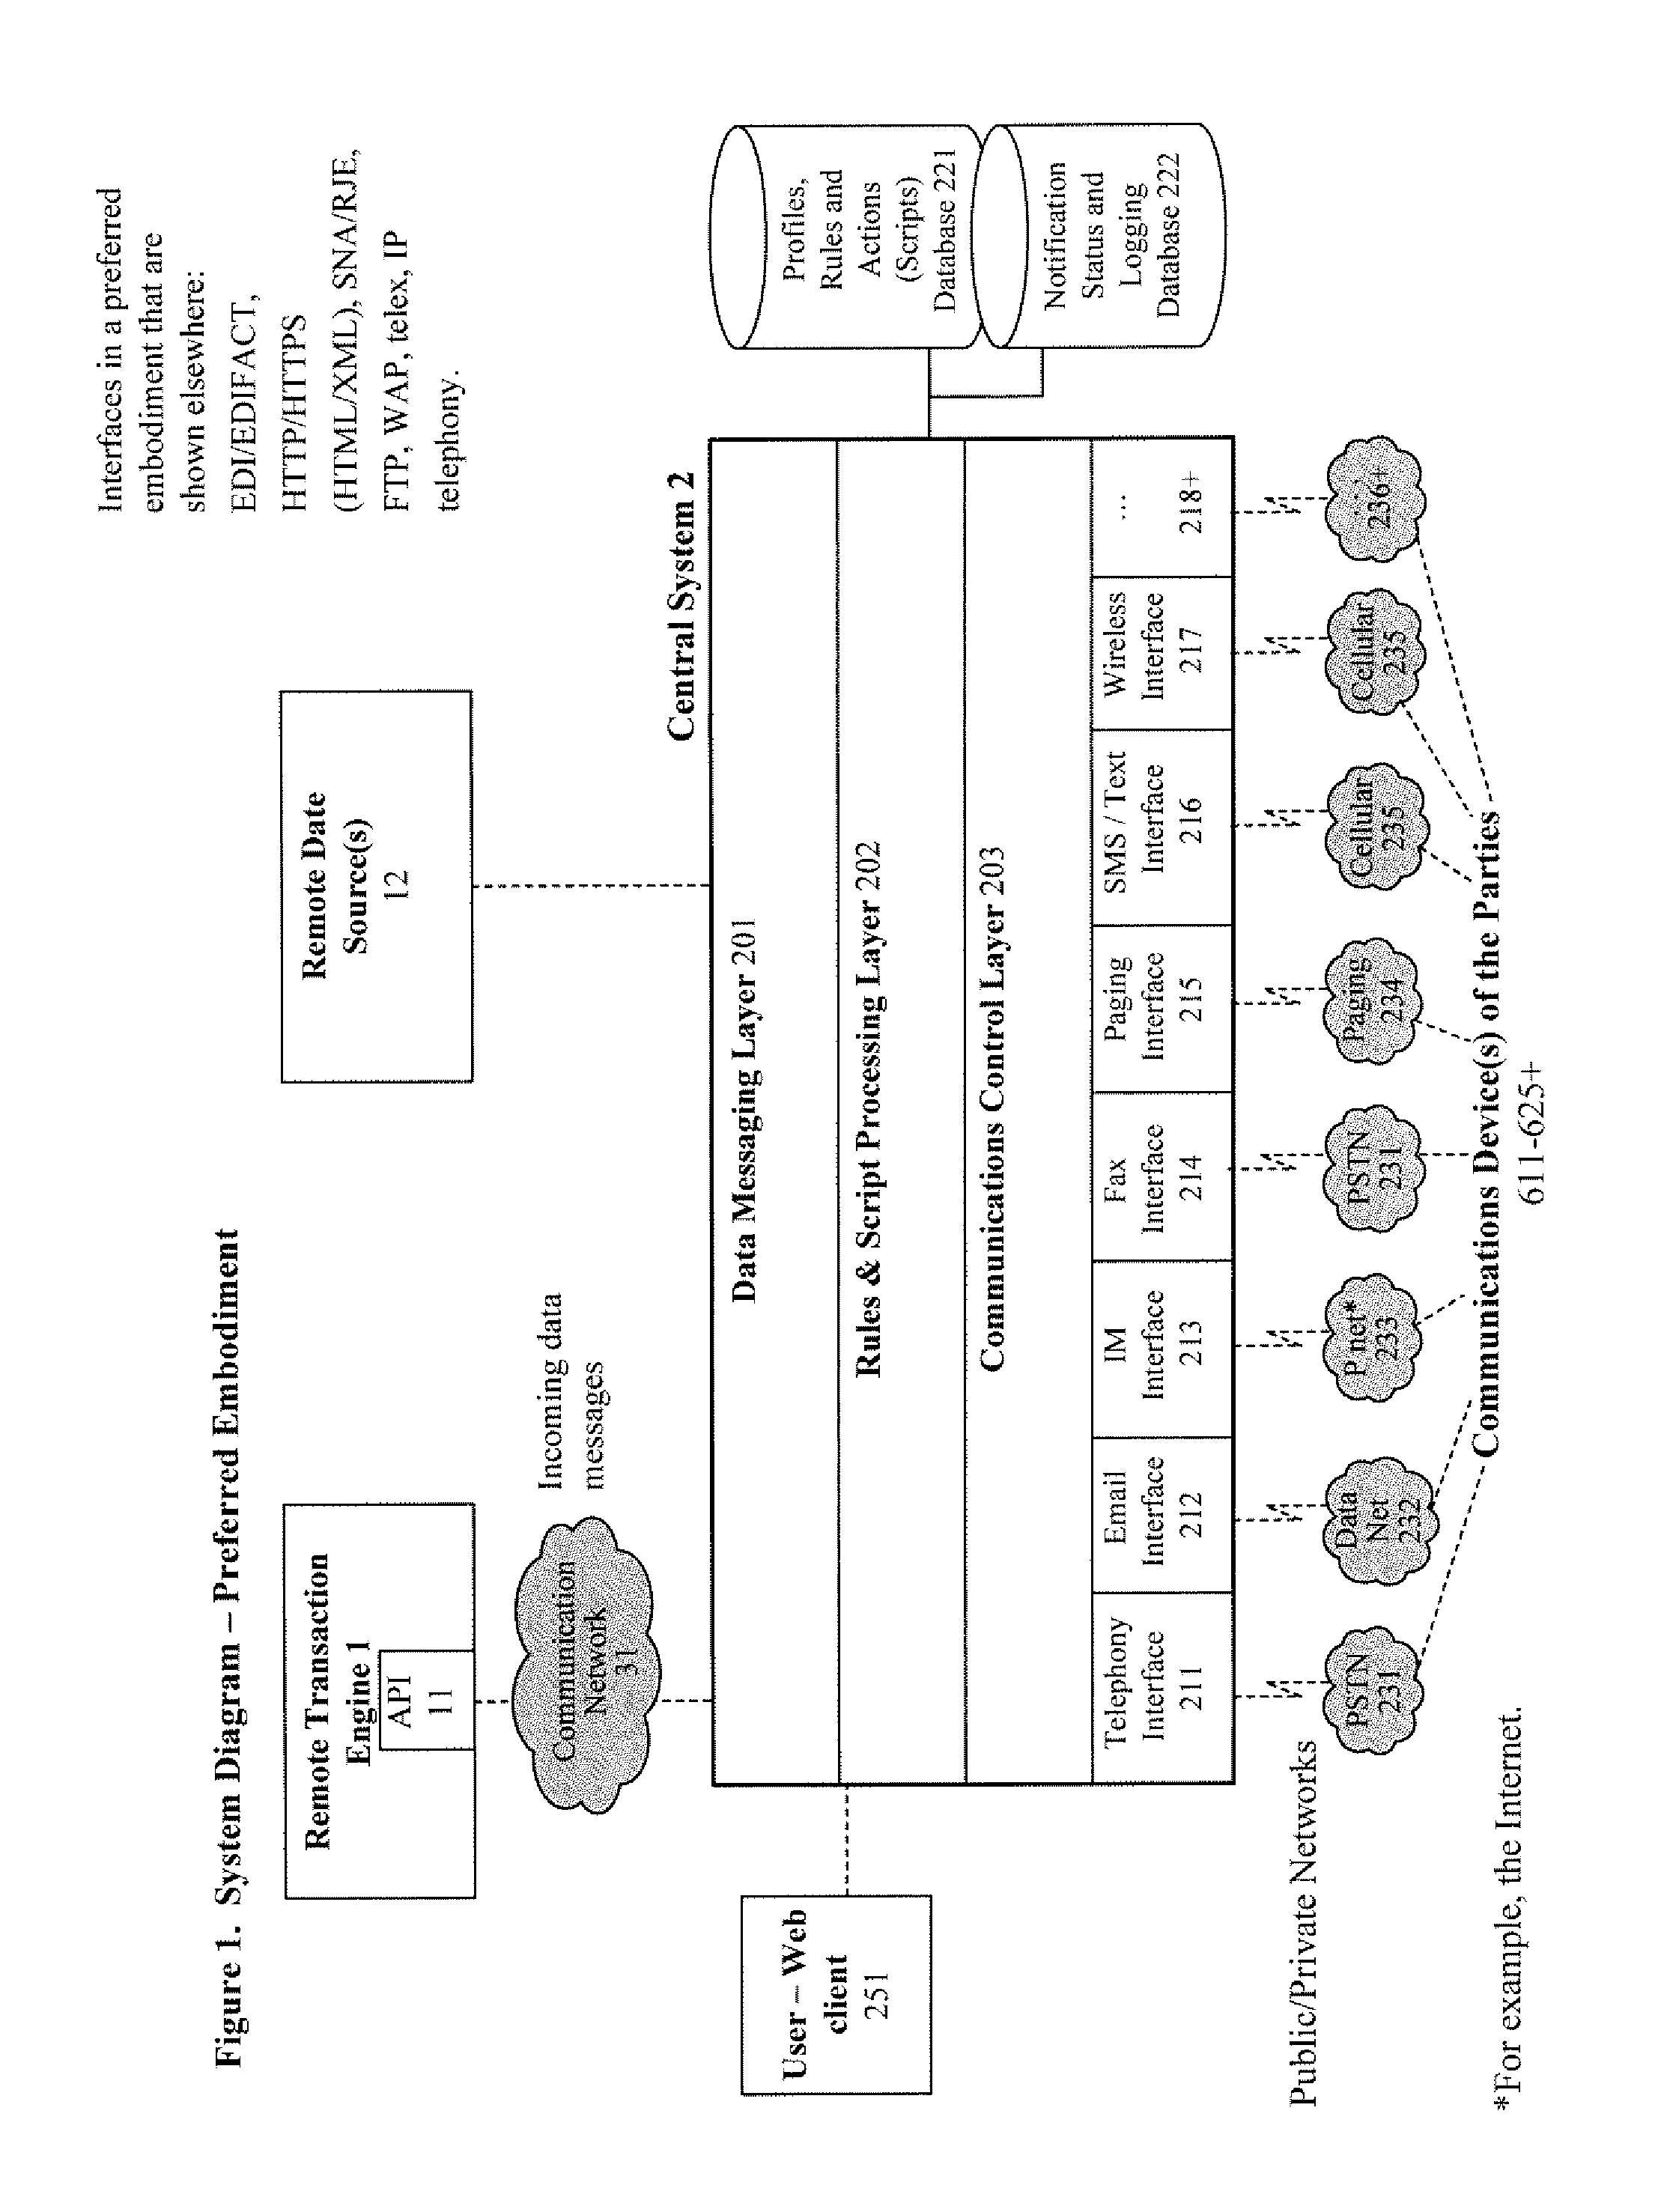 System and method for verification, authentication, and notification of transactions